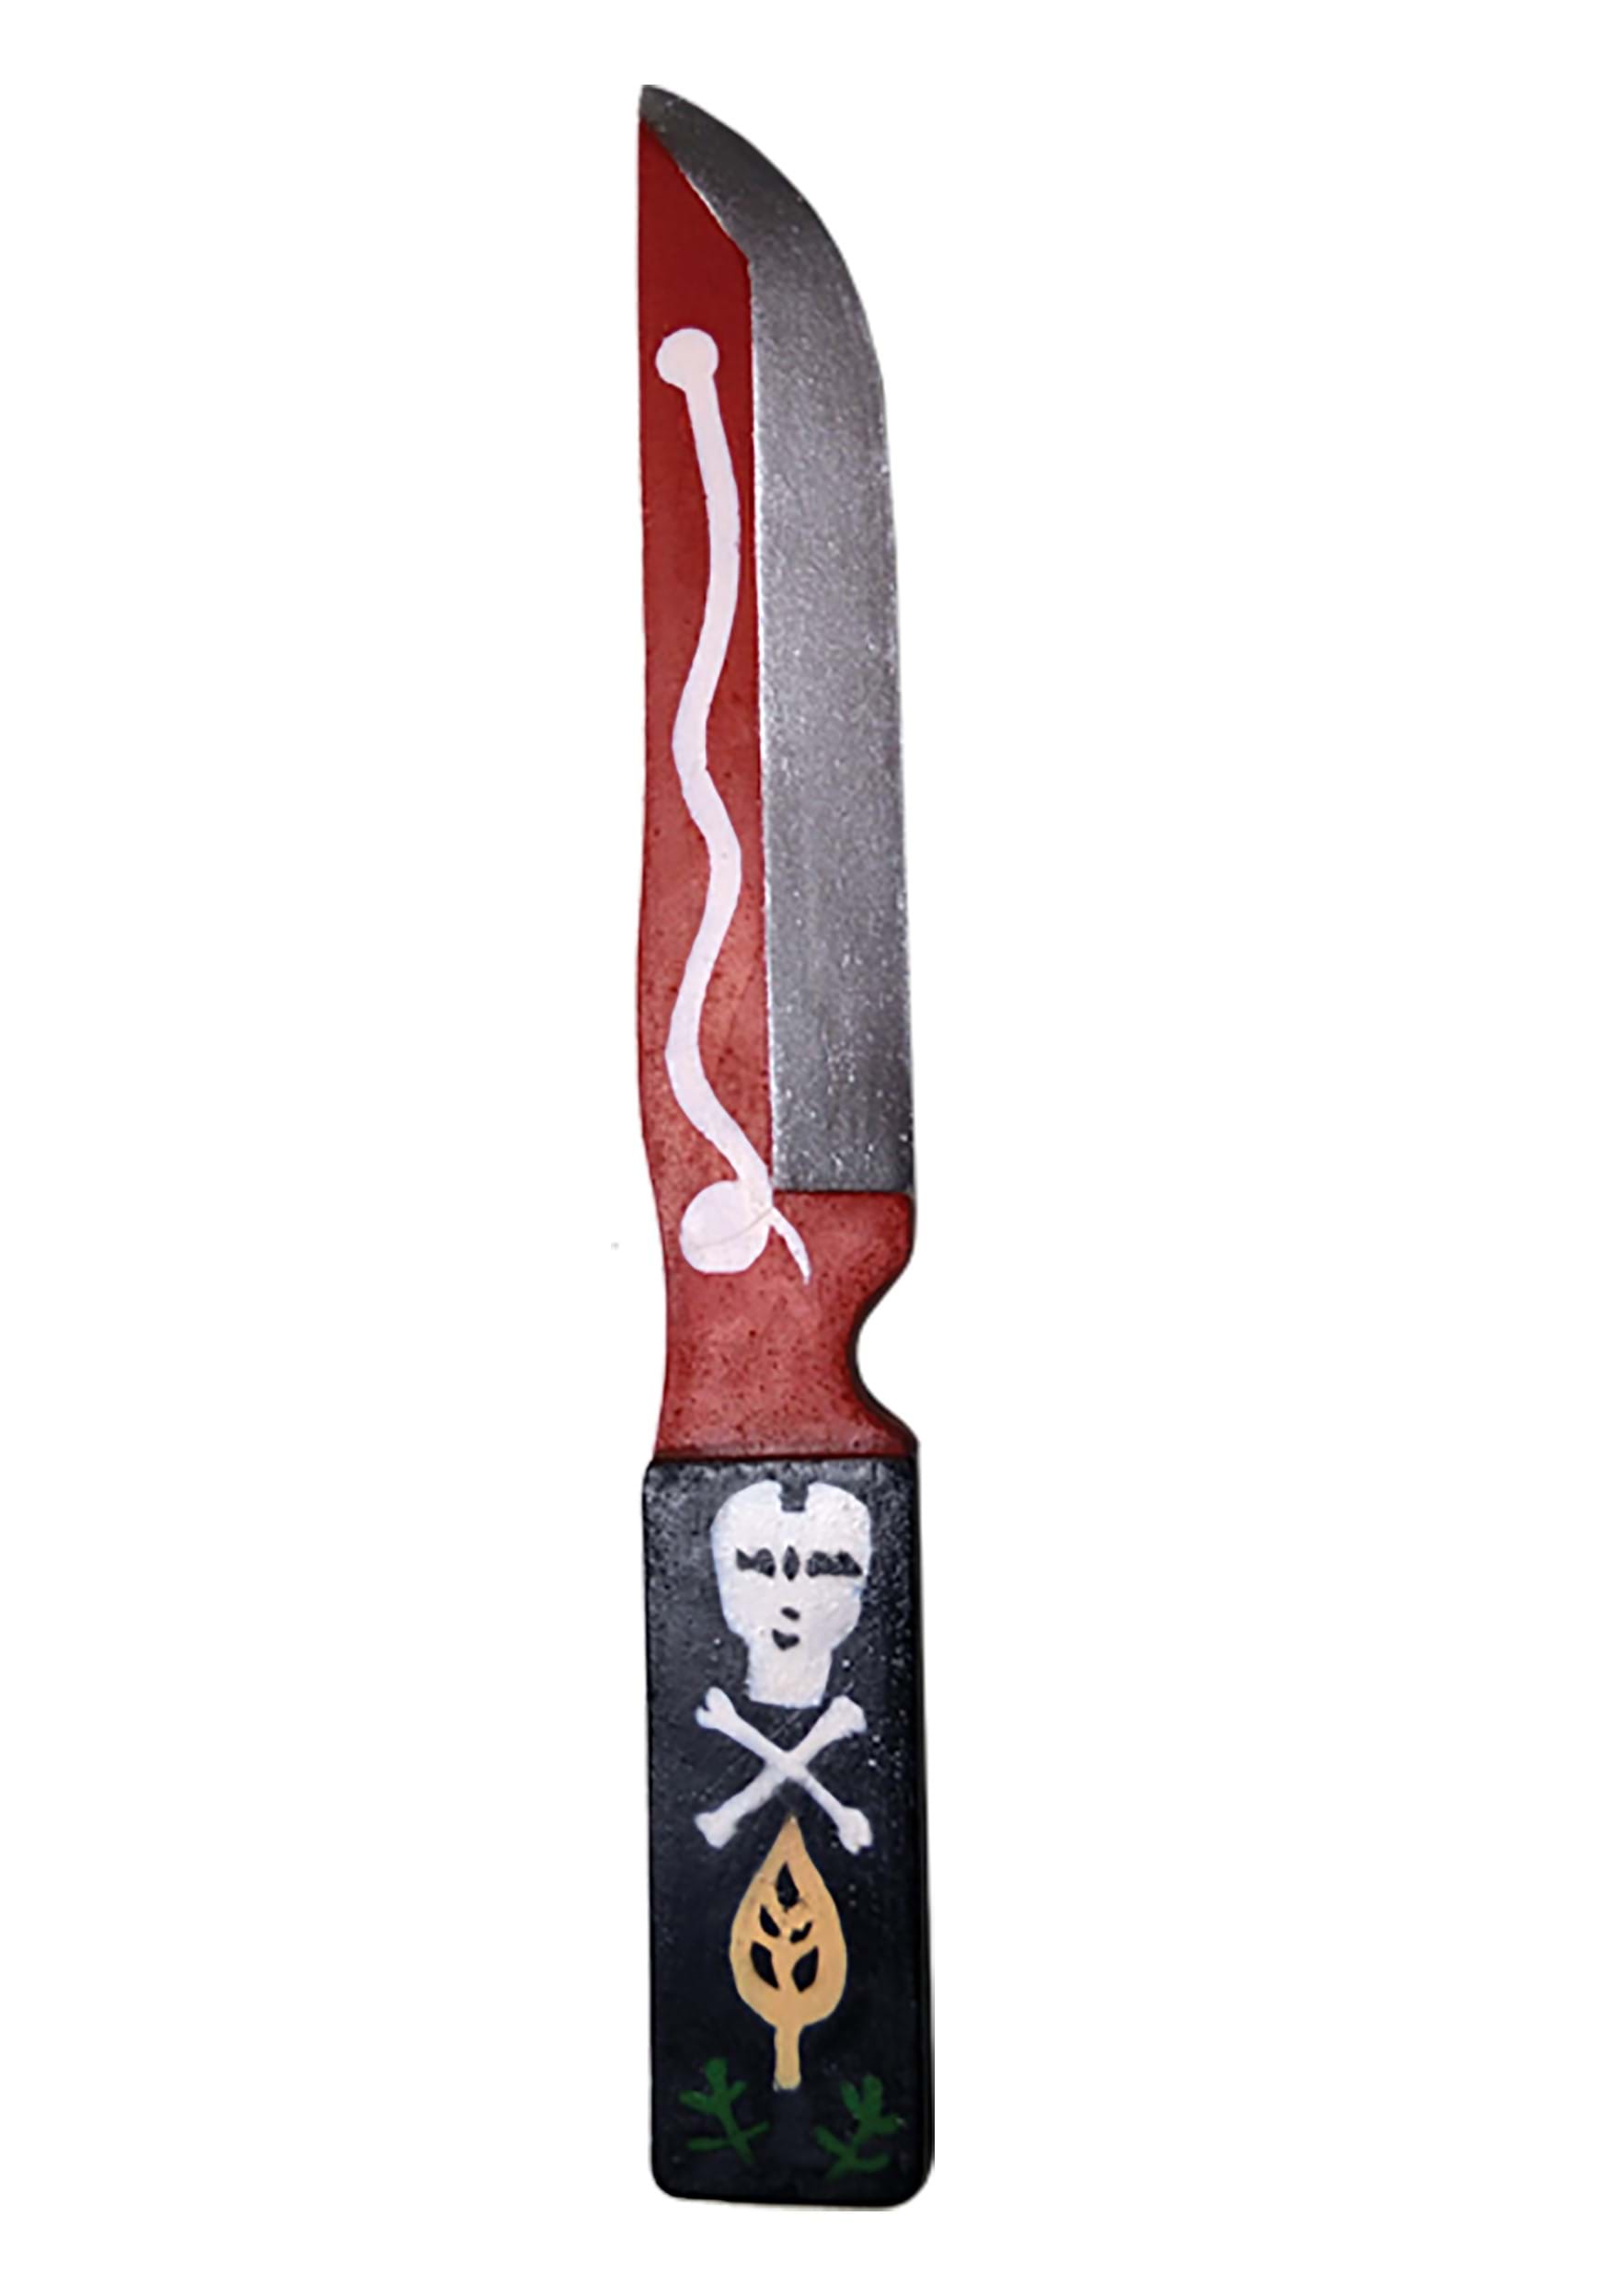 Childs Play 2 Toy Voodoo Knife